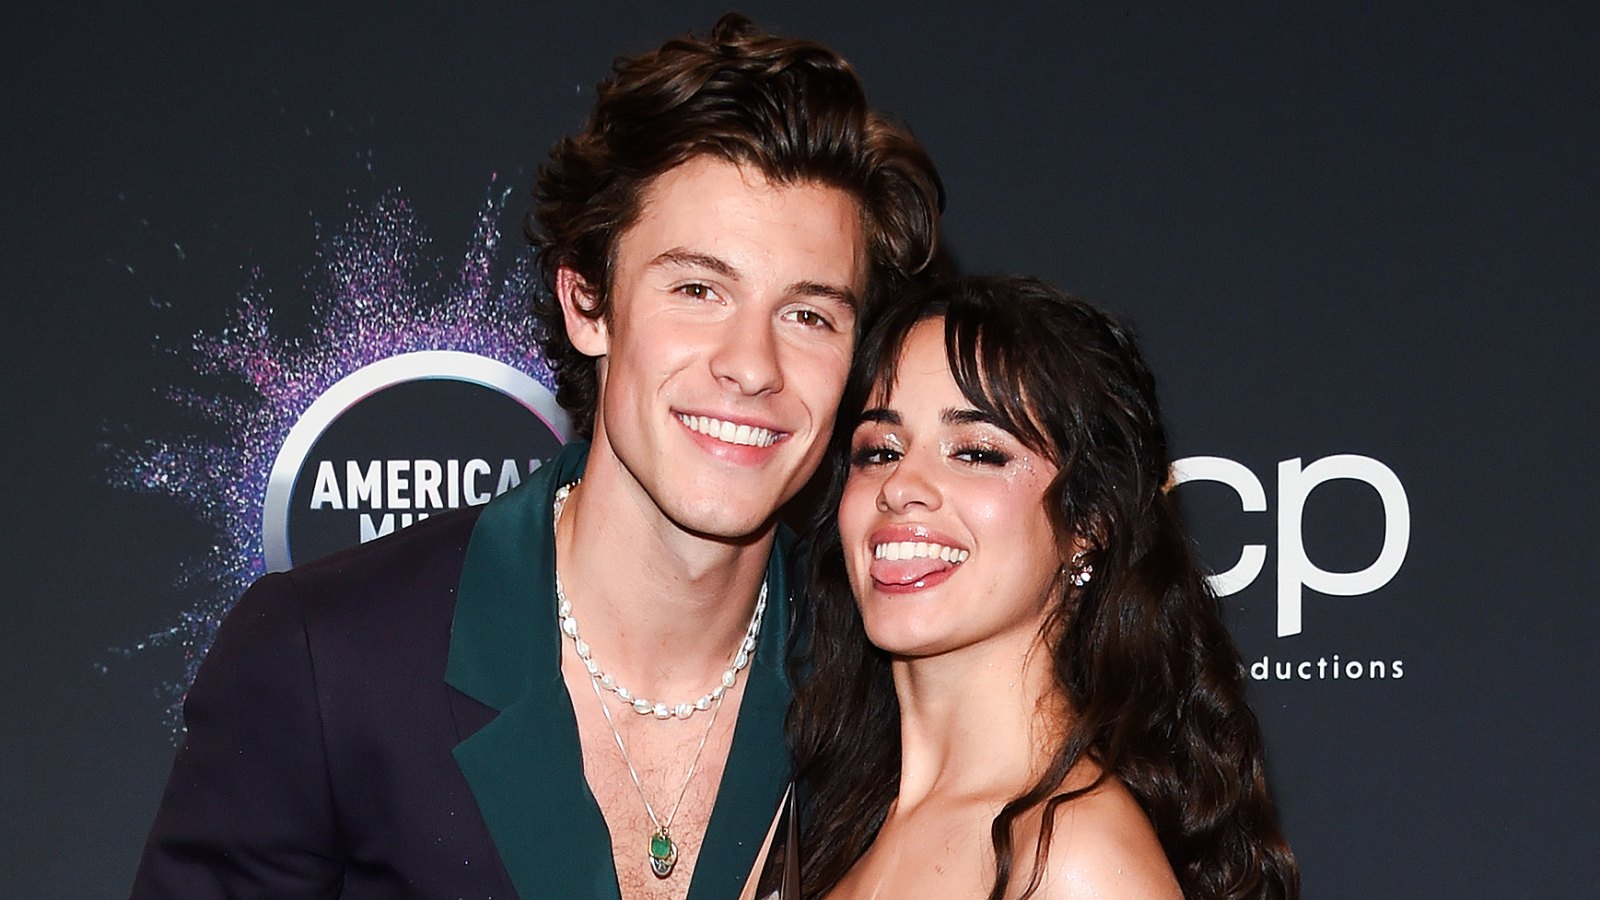 Shawn Mendes and Camila Cabello love songs on album